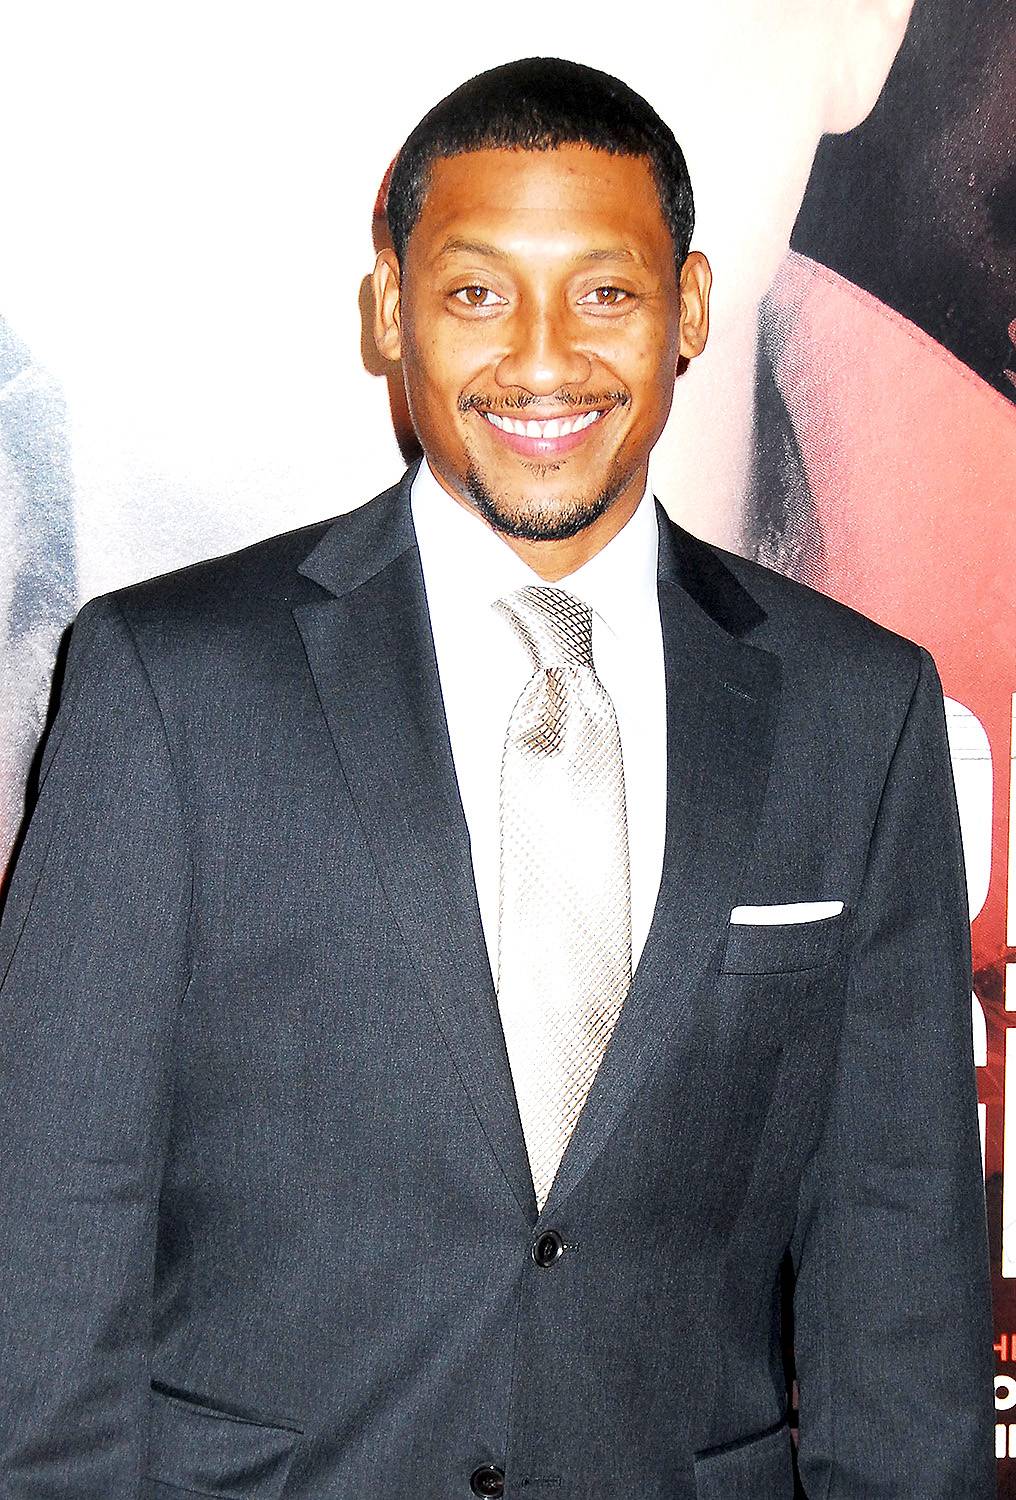 Two Decades of Khalil Kain